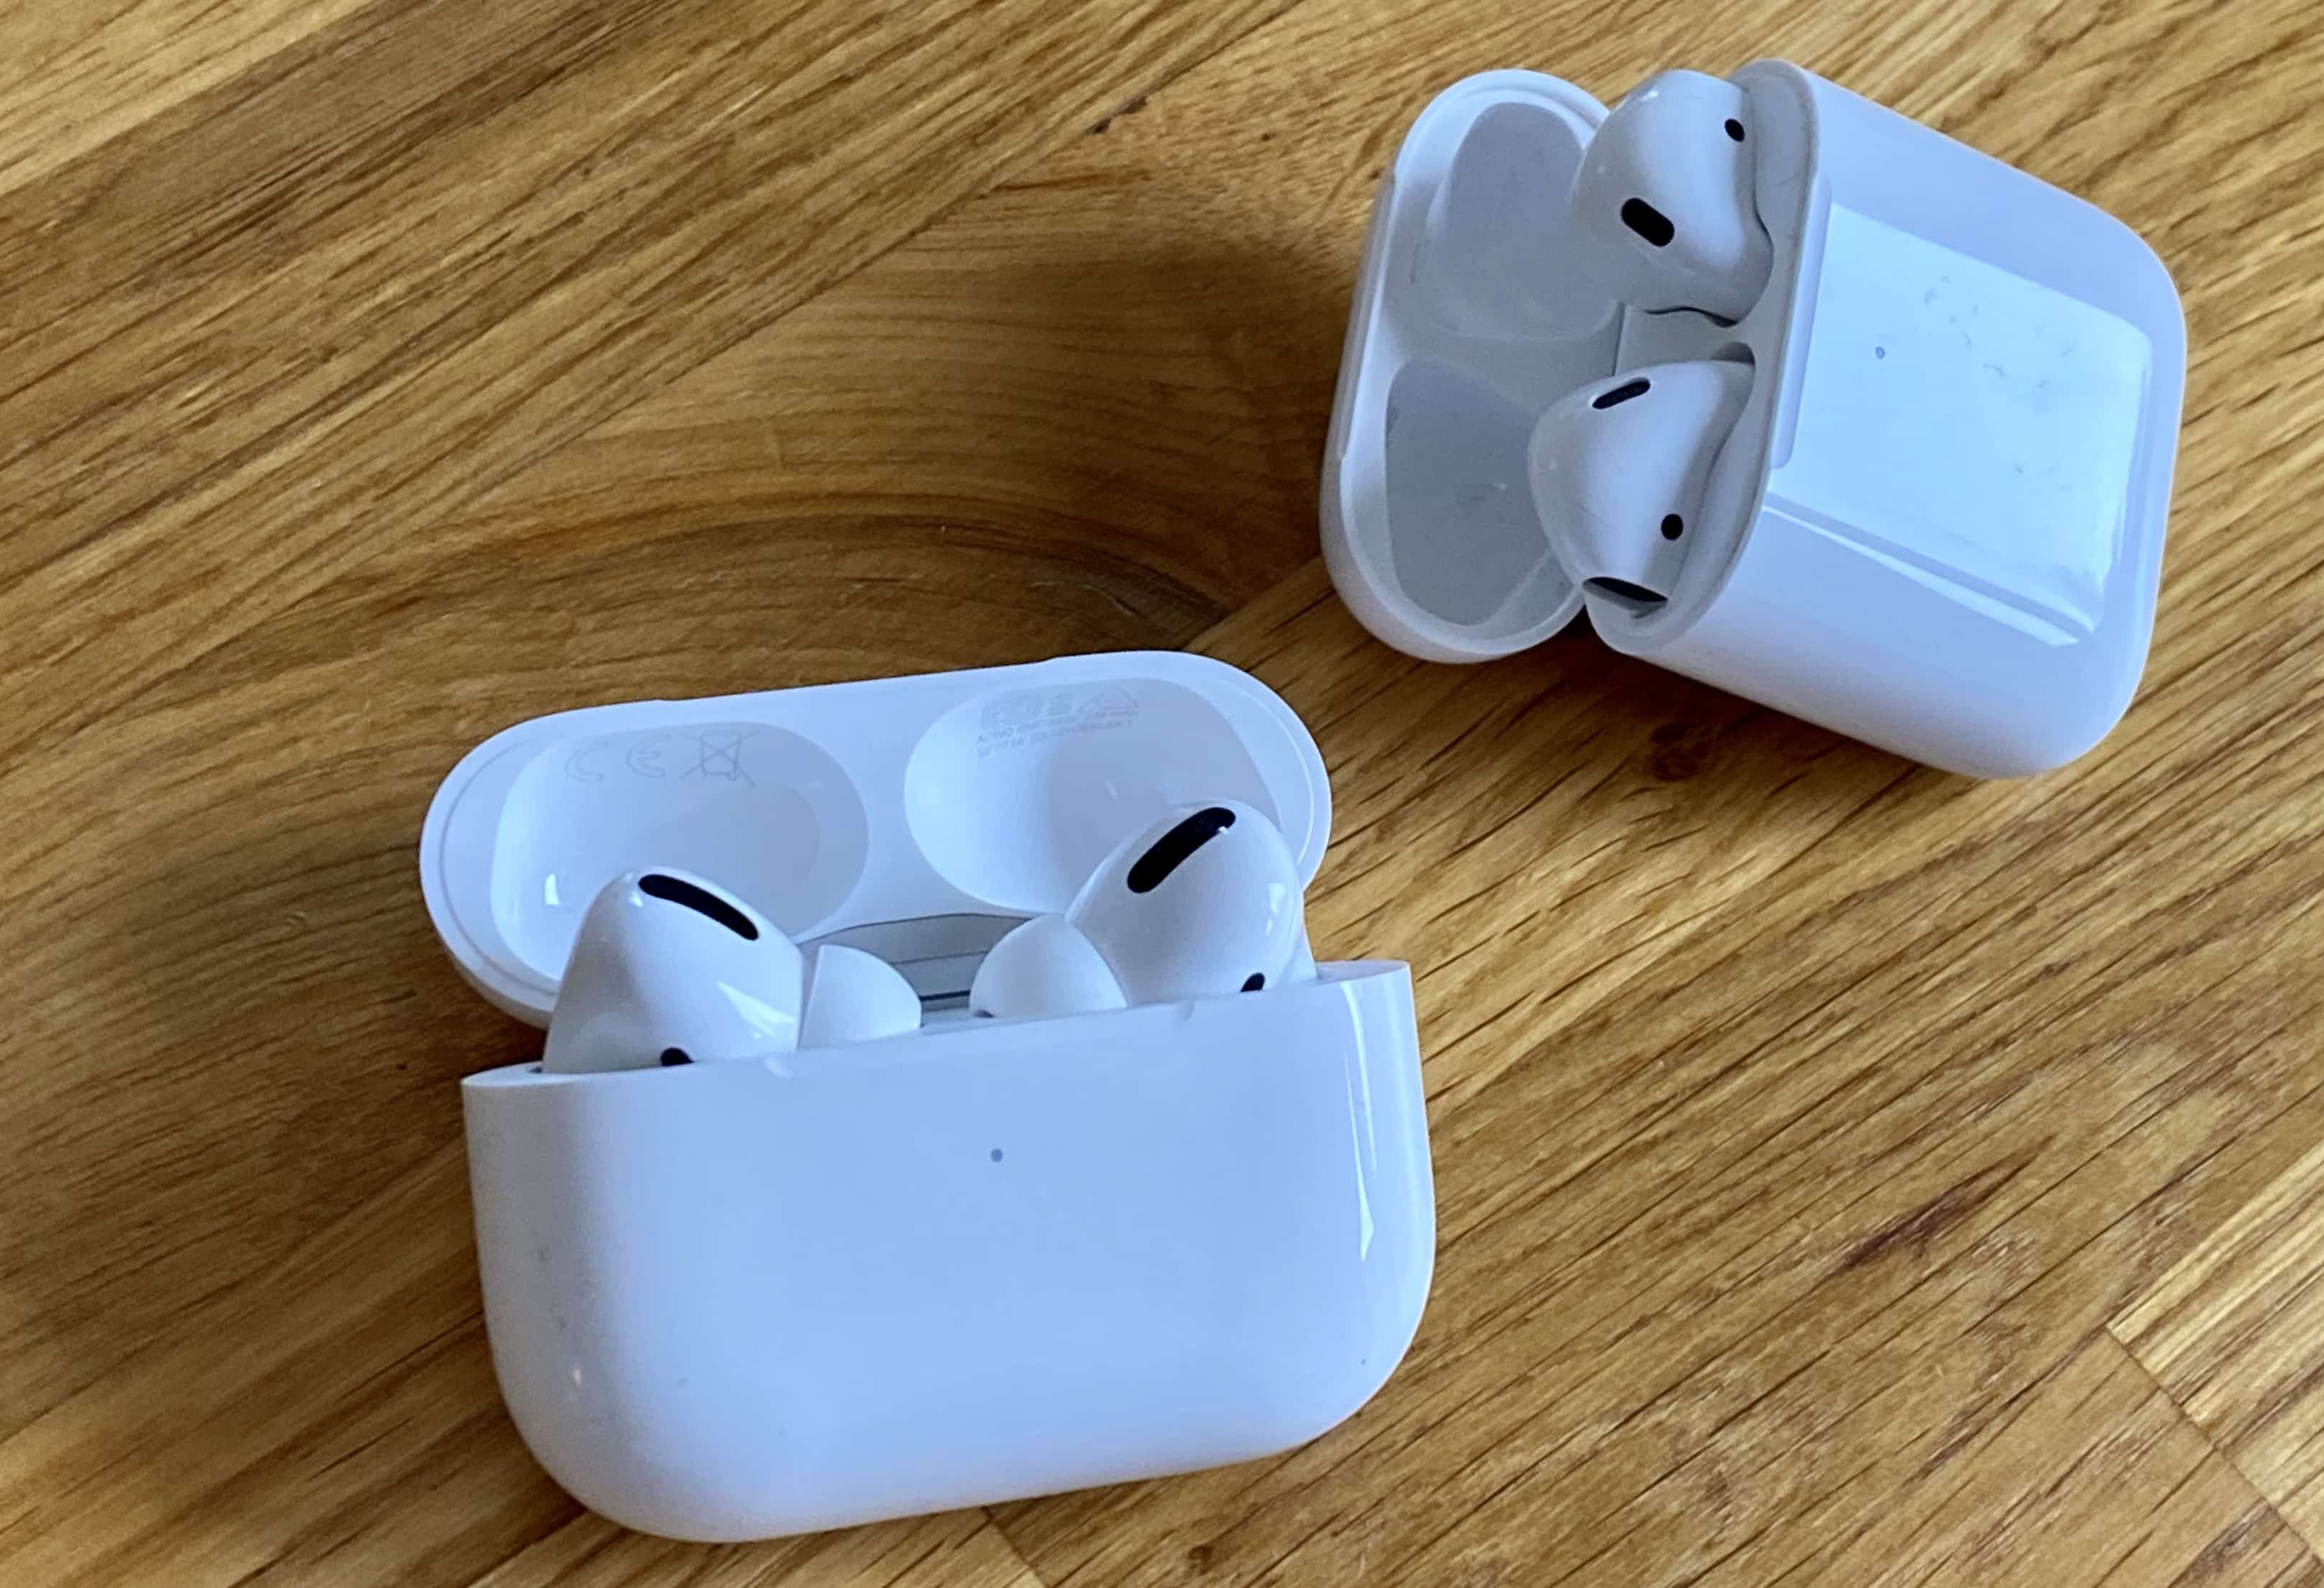 Tim Cook thinks early adopters will buy both AirPods and AirPods Pro